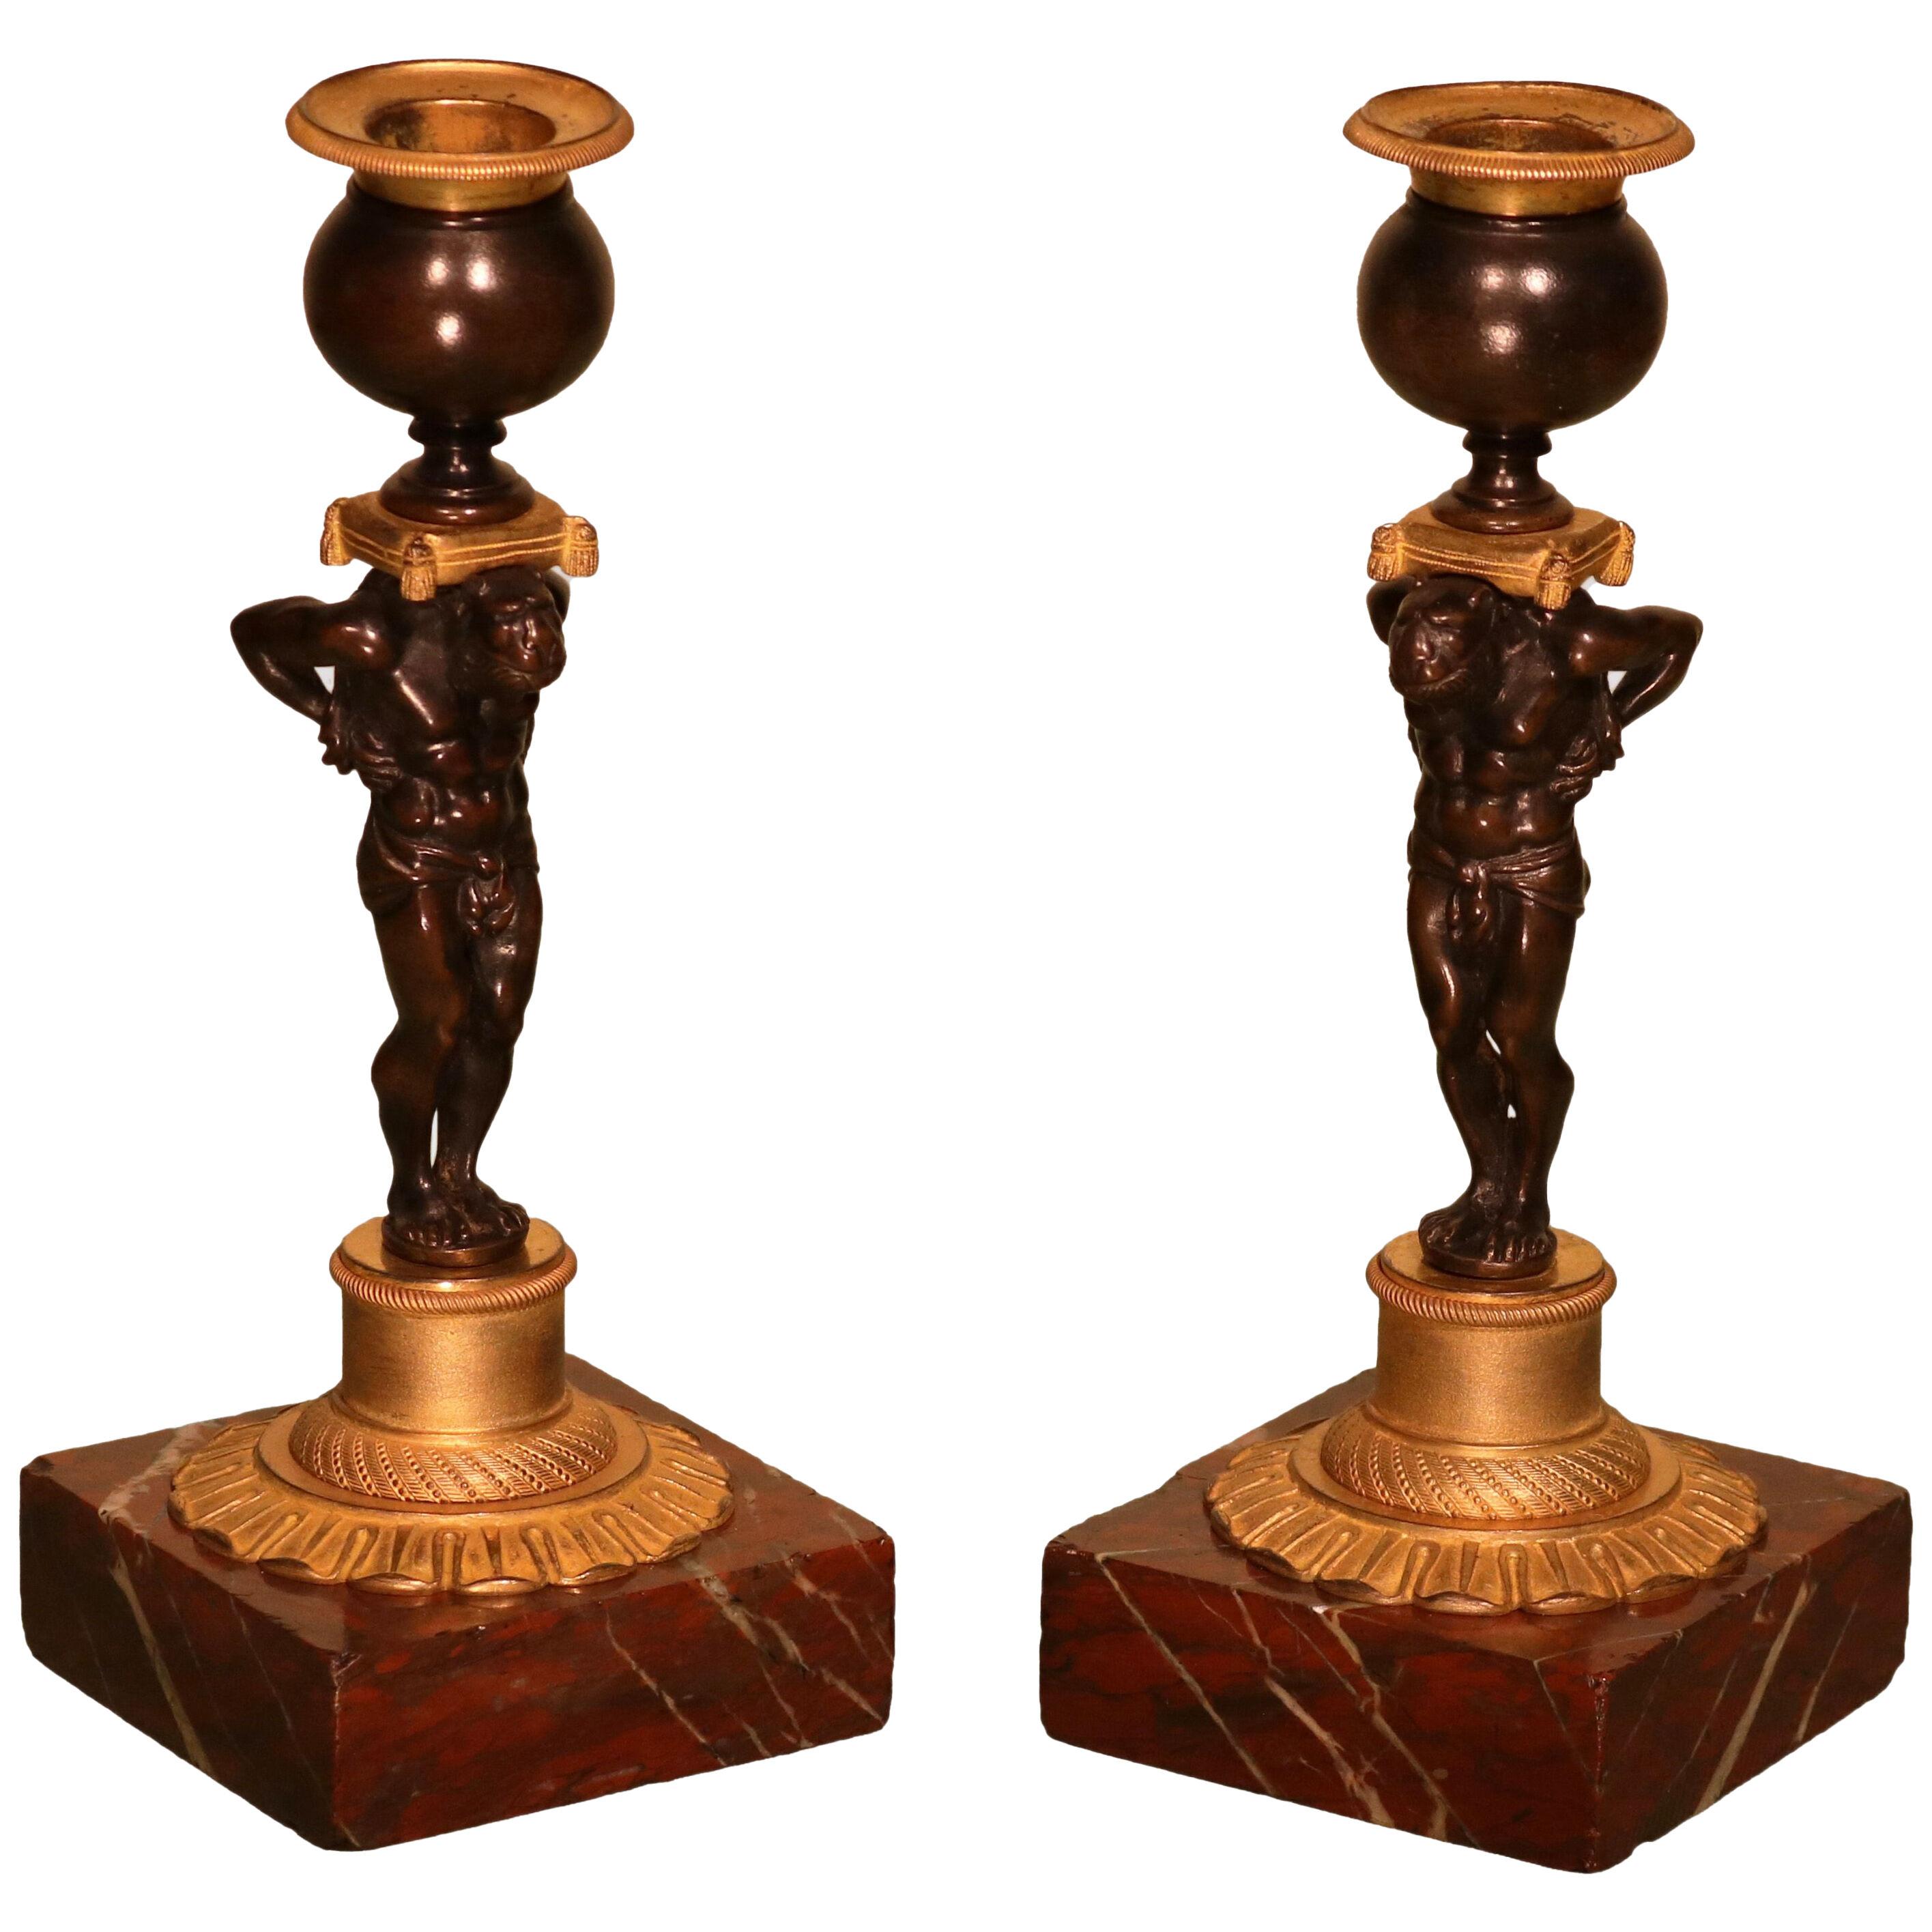 A pair of early 19th century Regency period candlesticks in the form of Atlas